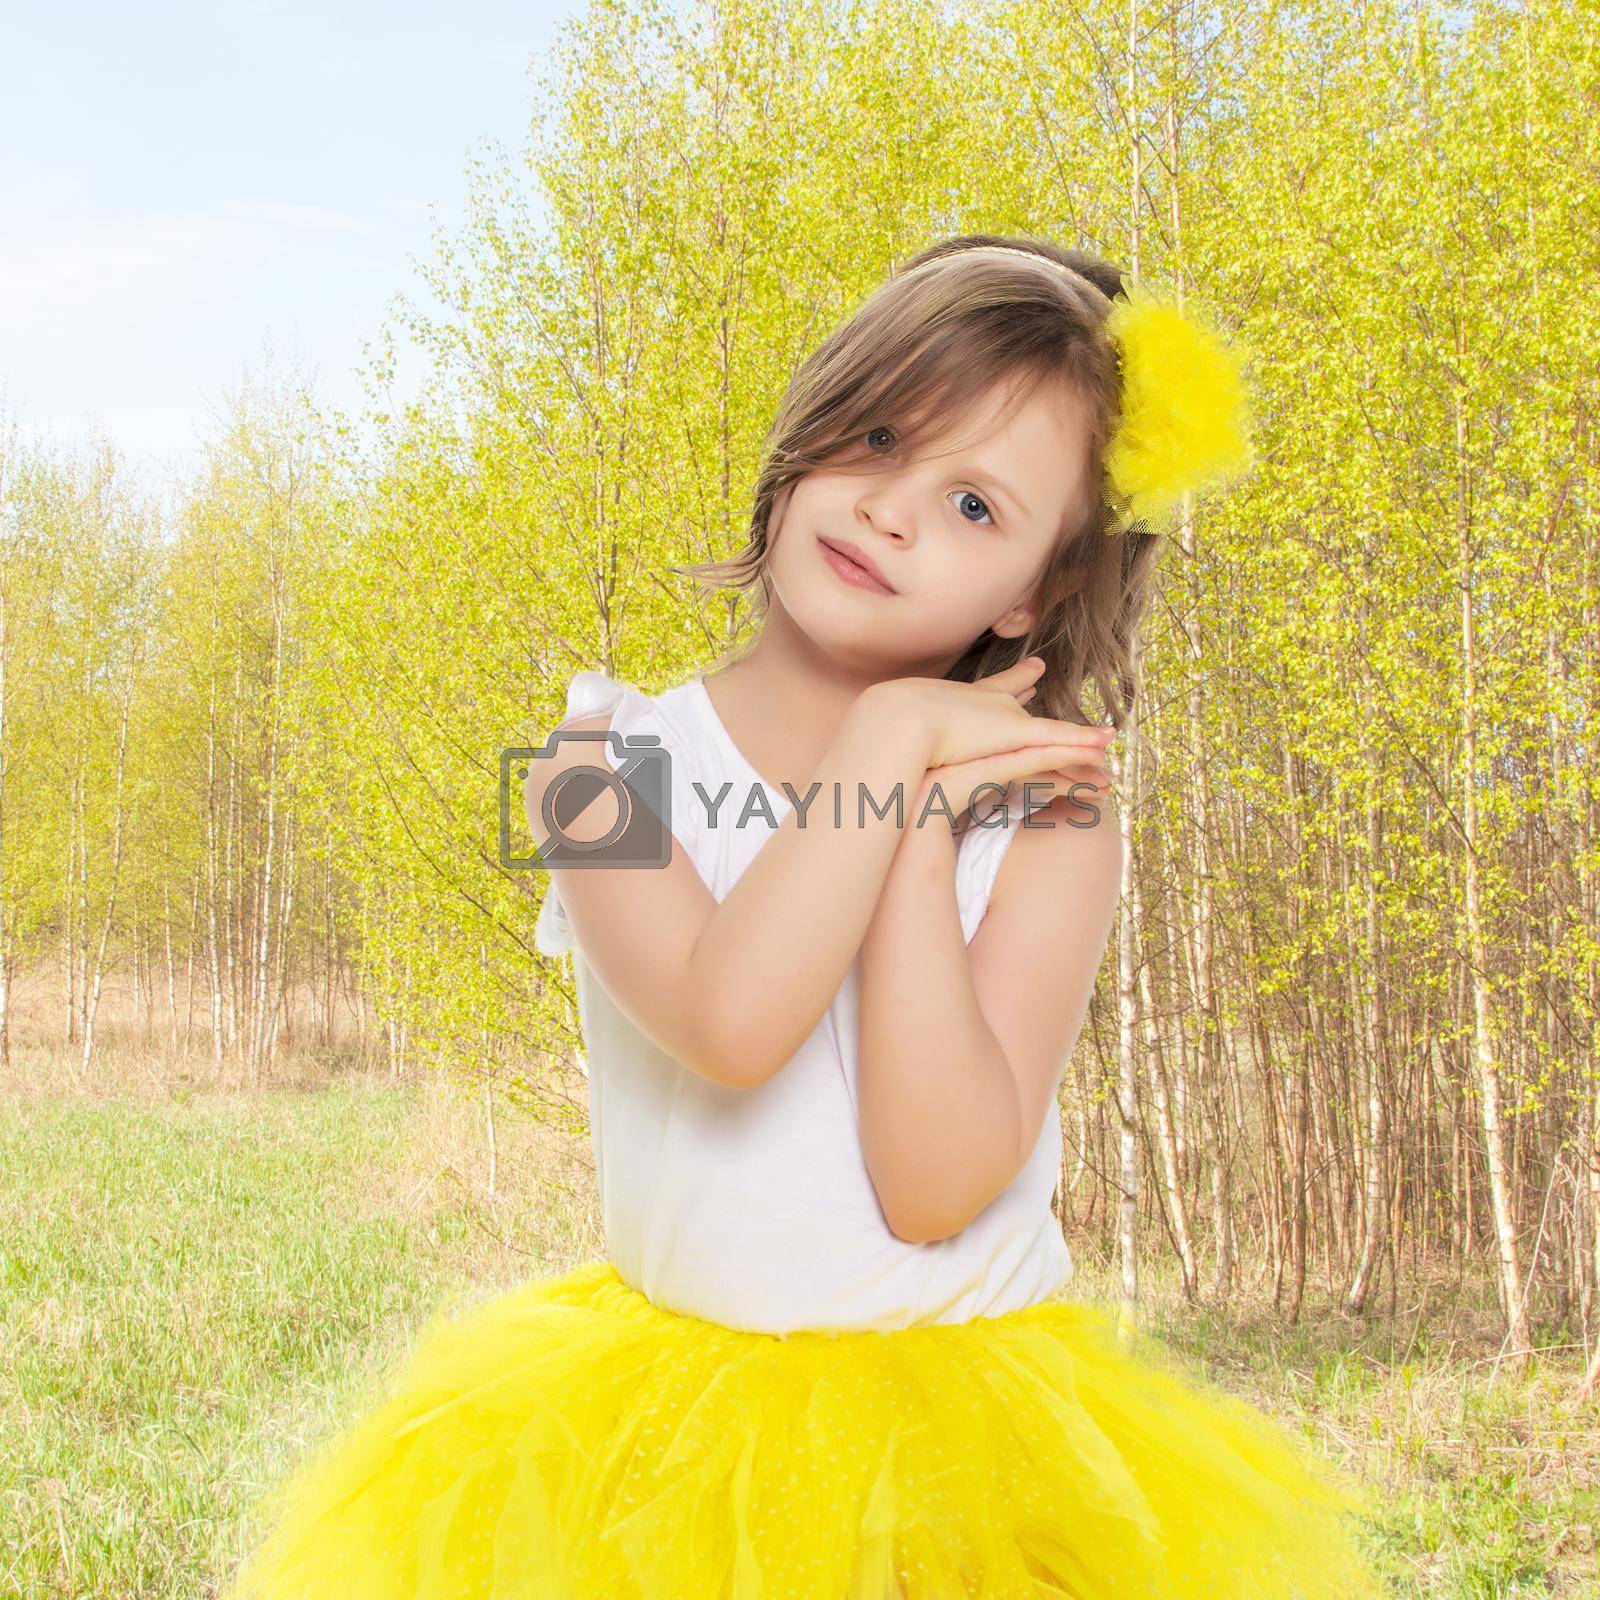 Royalty free image of Little girl in a yellow skirt and white t-shirt. by kolesnikov_studio